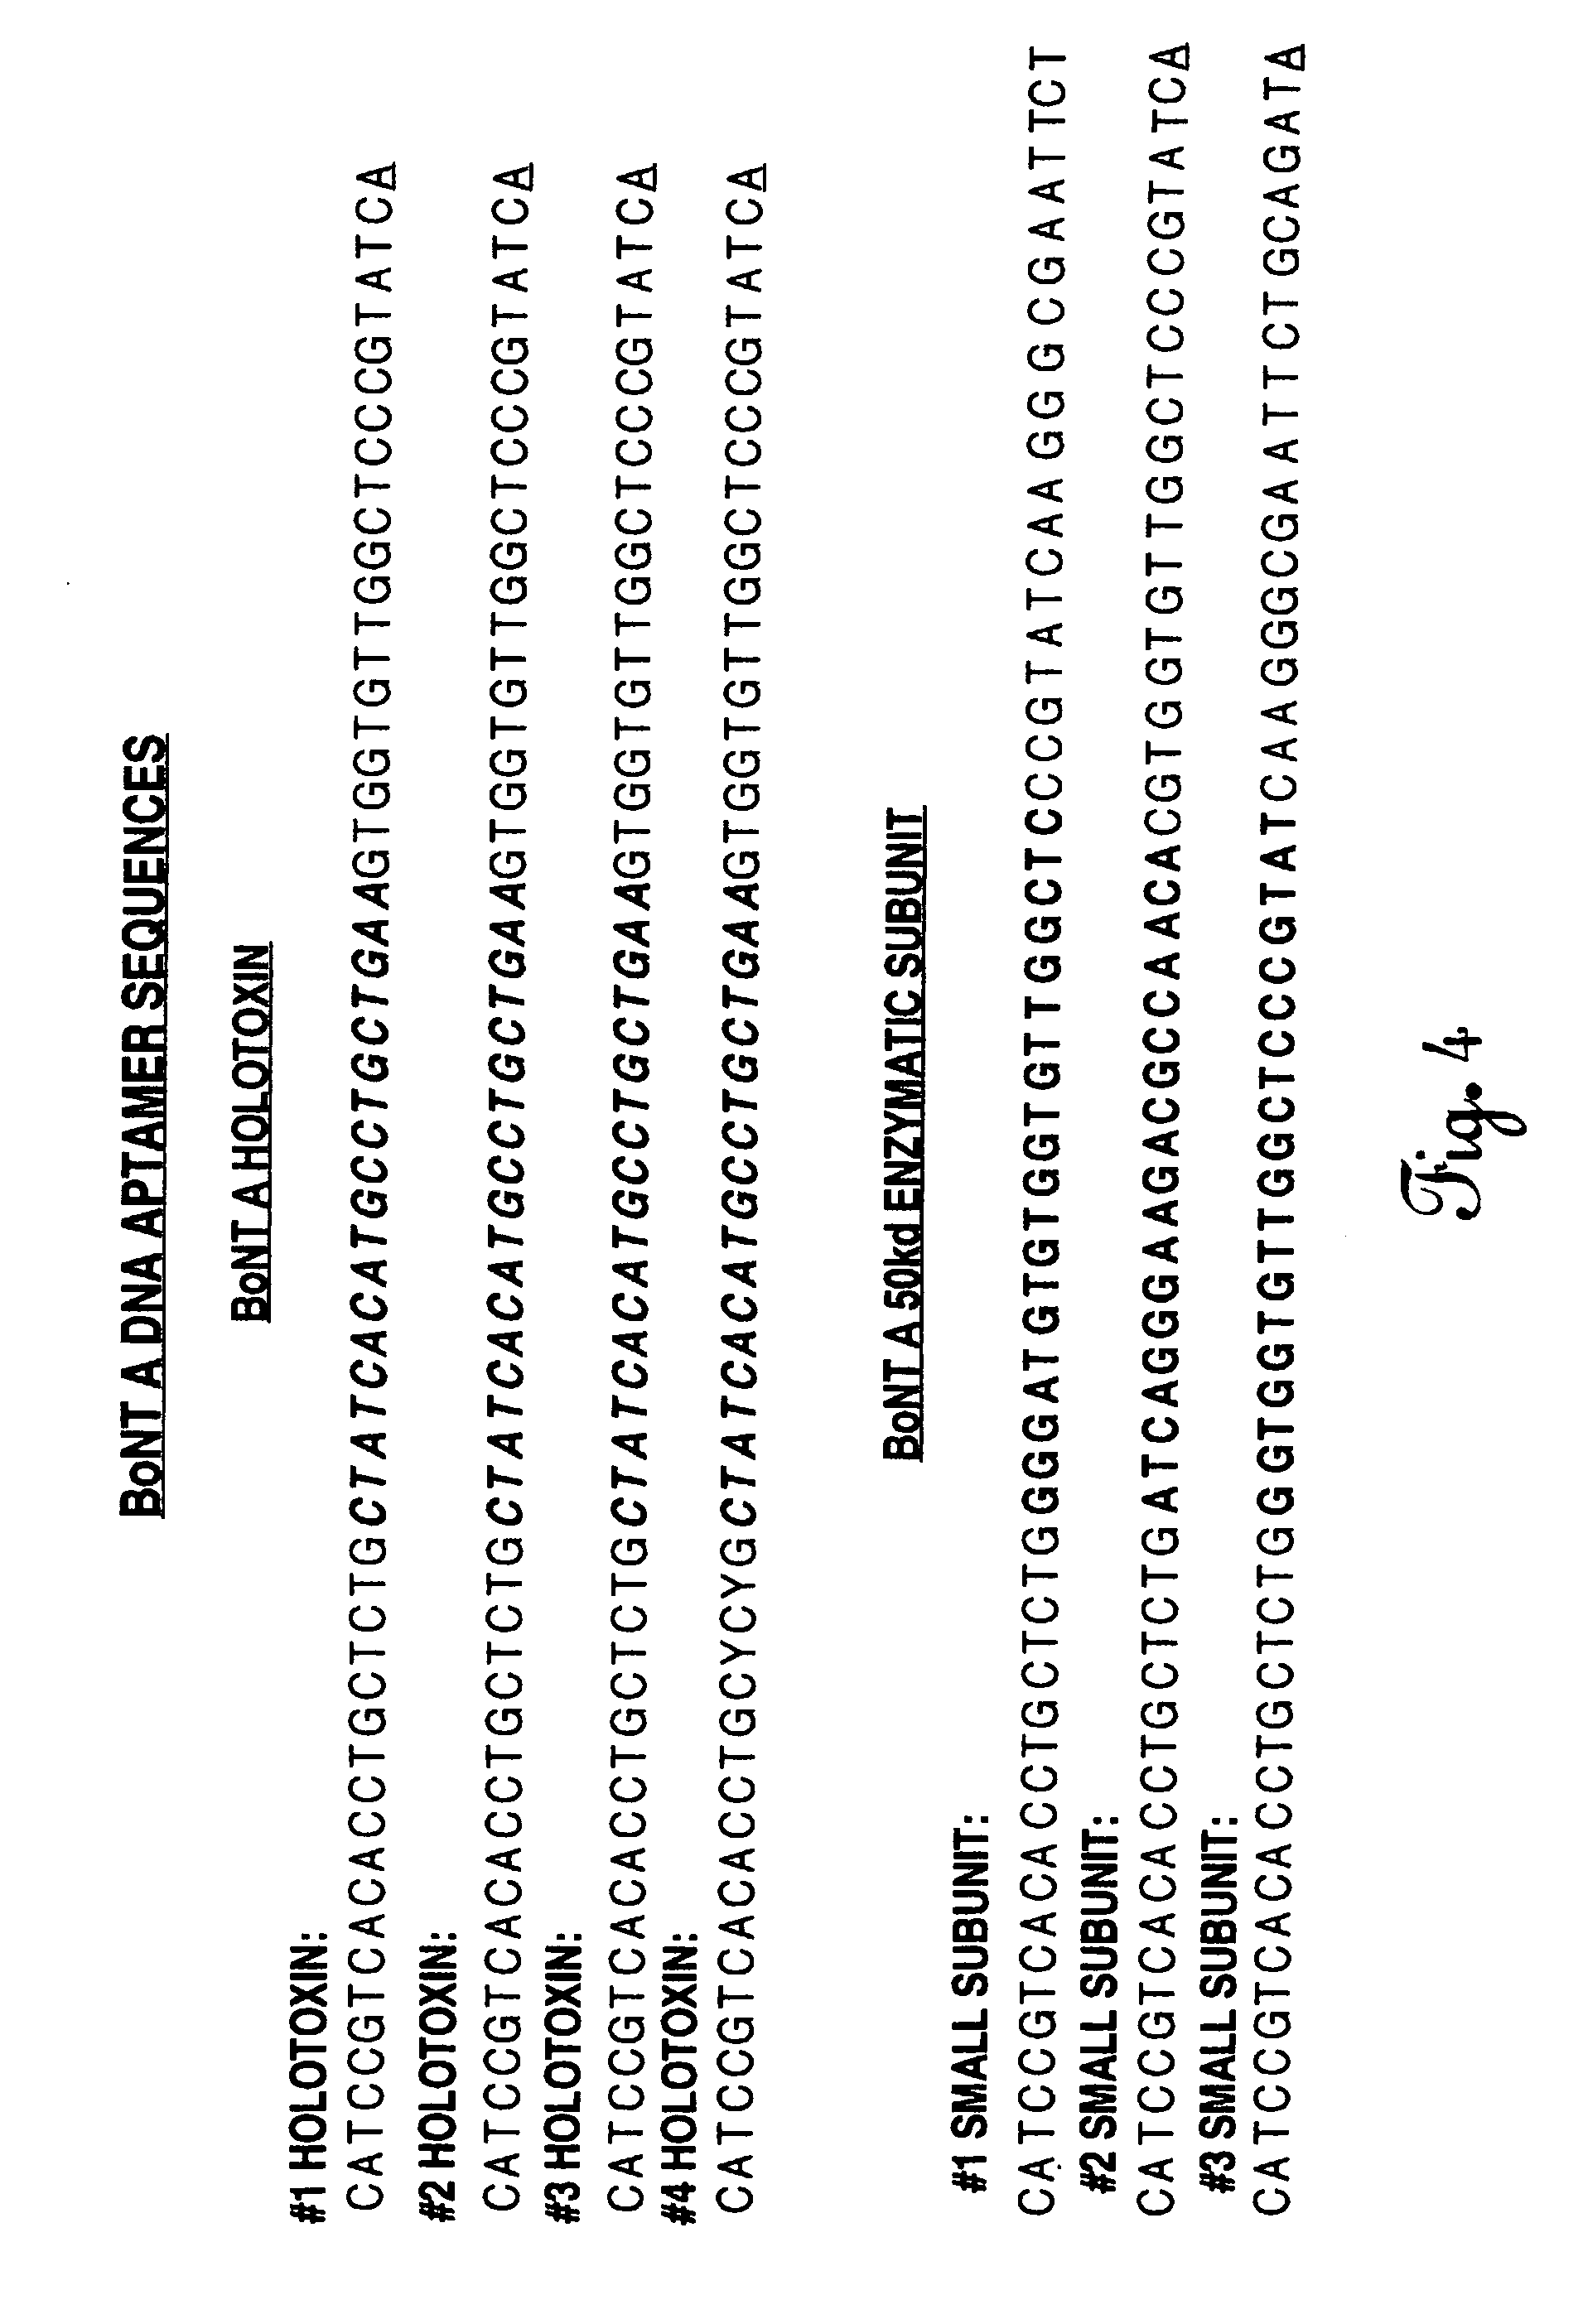 Methods of producing interachain fluorophore-quencher FRET-aptamers and assays